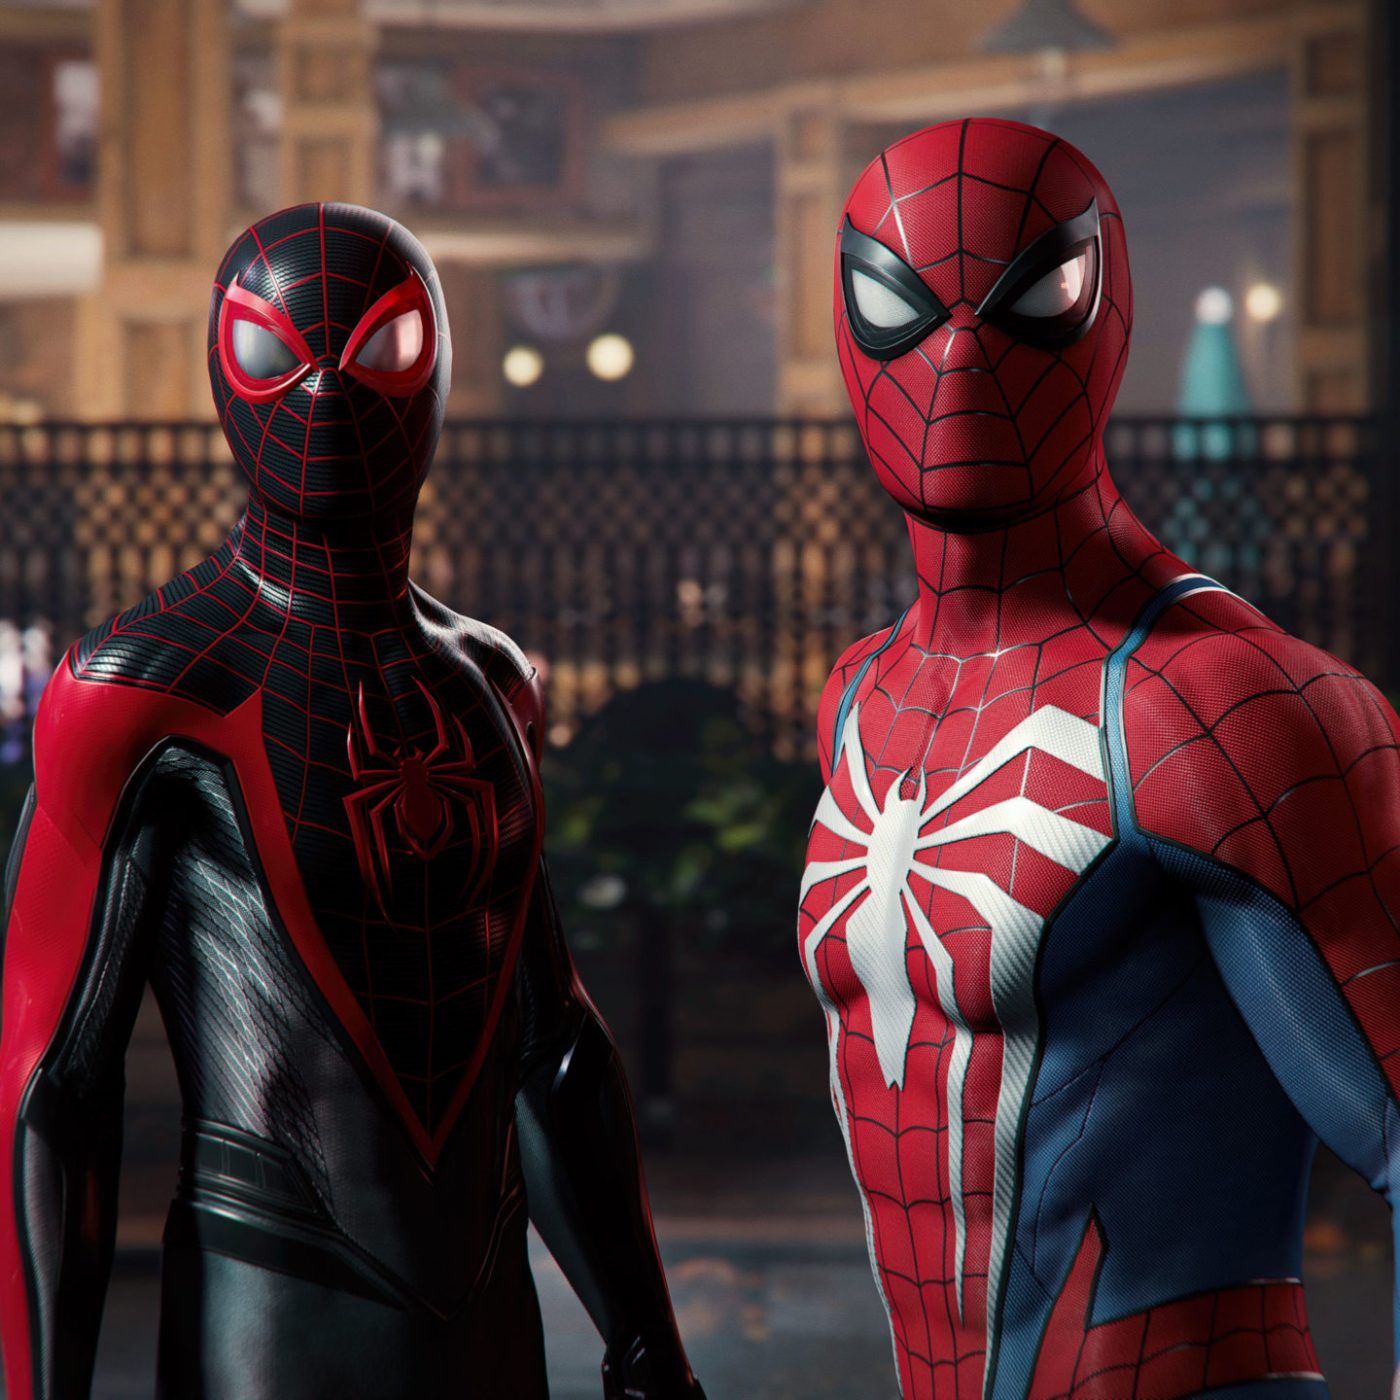 PlayStation Showcase: Spider-Man 2 leads PS5's 2023 games lineup